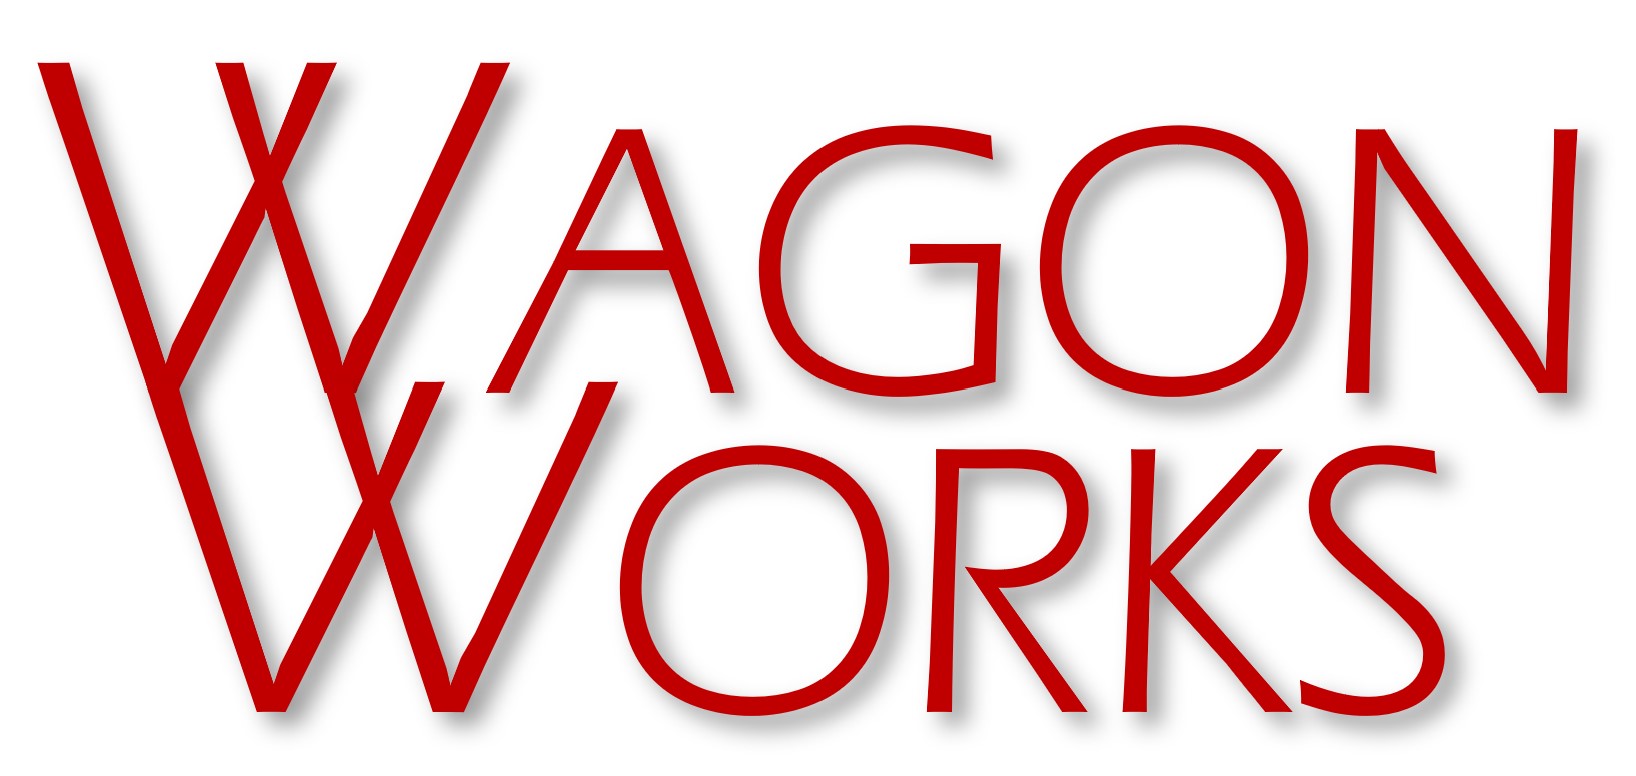 Wagon Works - build accurate replica wagons - Easily